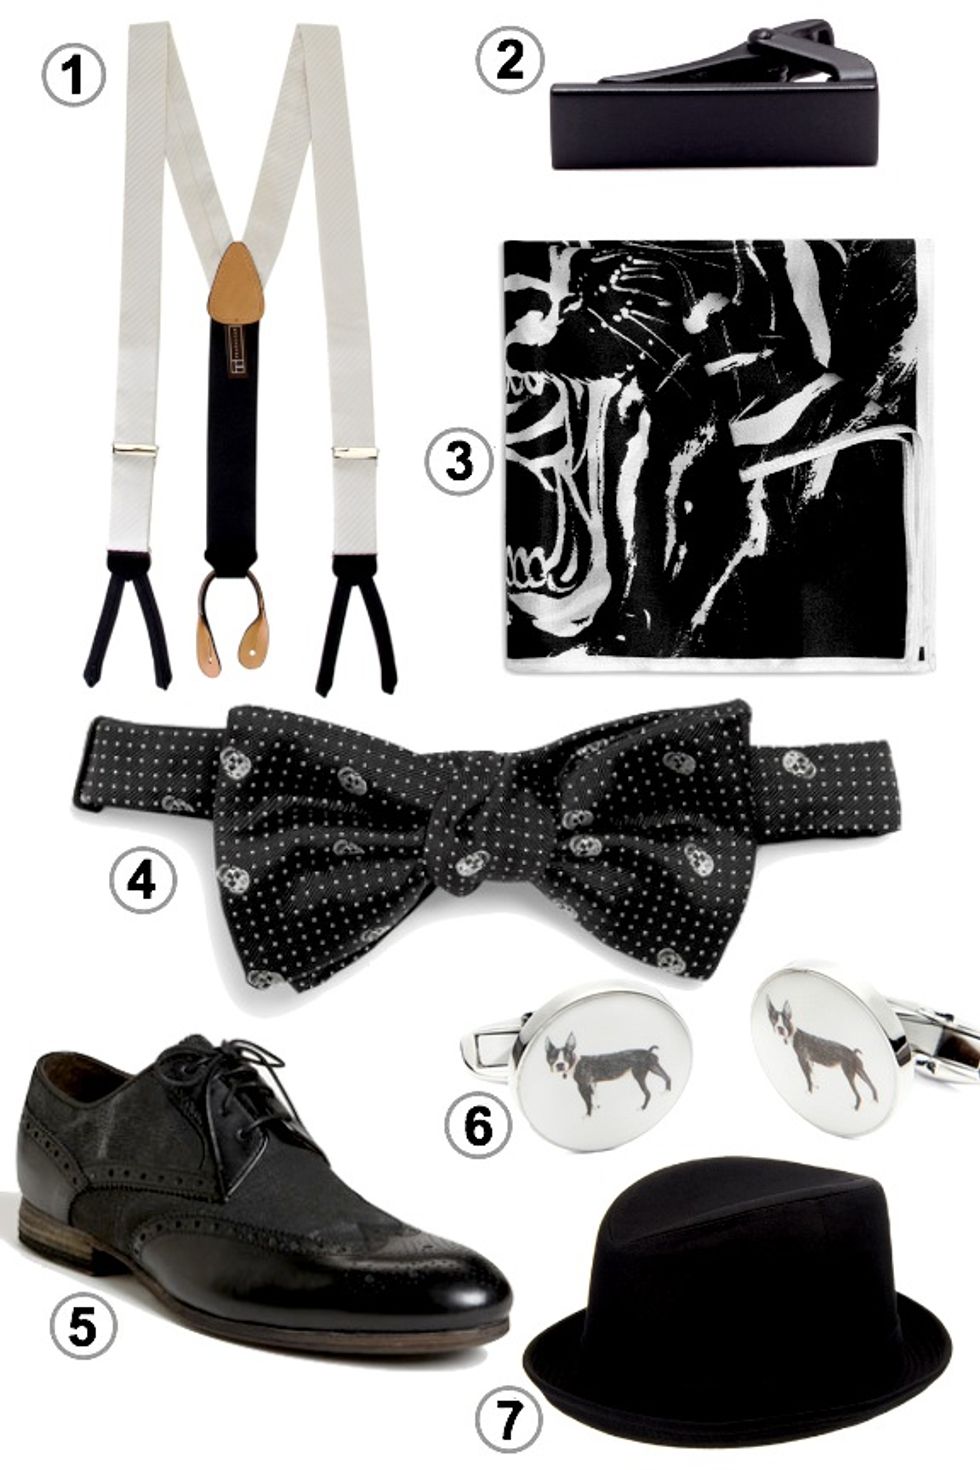 Look of the Week: Men's Accessories for the Black and White Ball